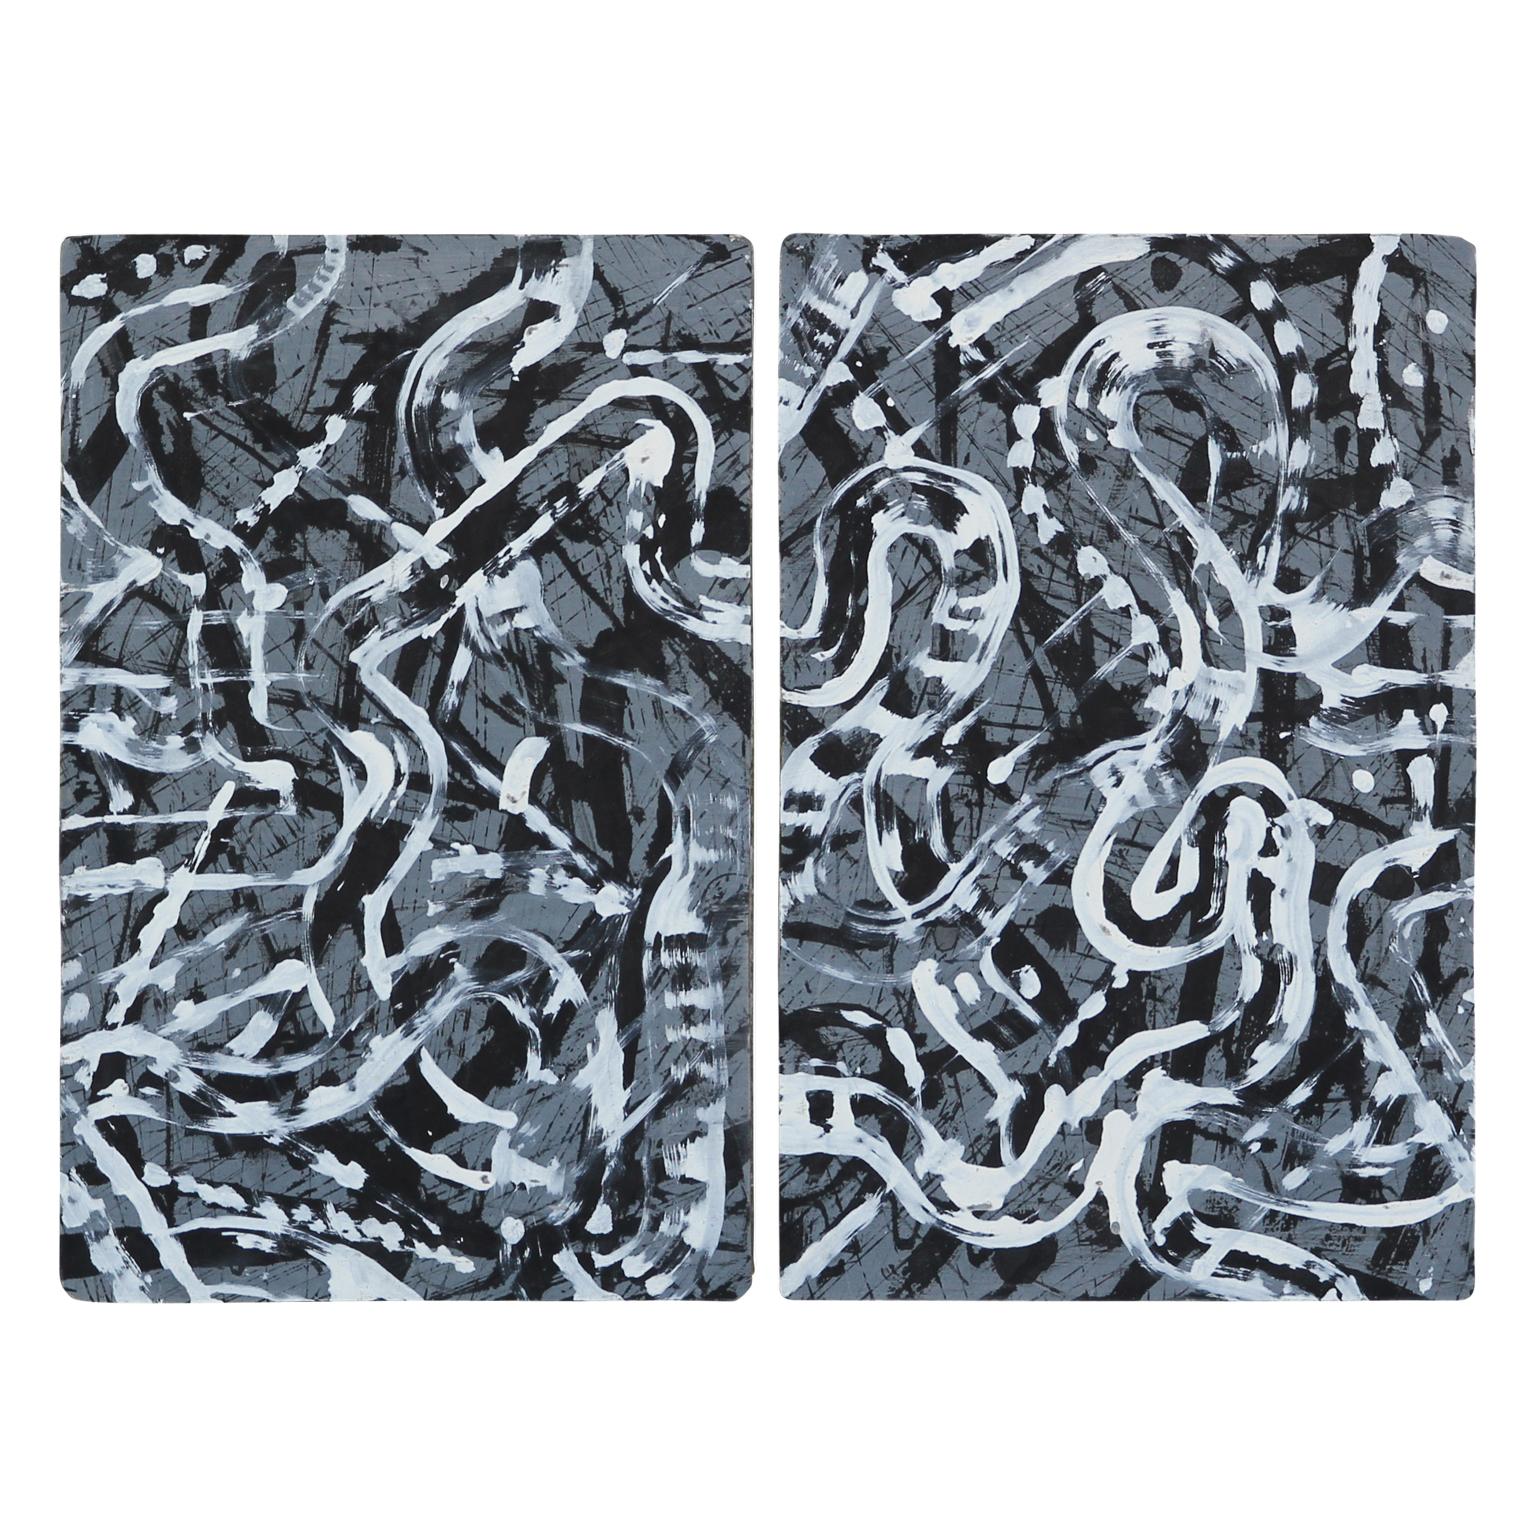 "Desperado" Black and White Abstract Expressionist Diptych  - Art by Ibsen Espada